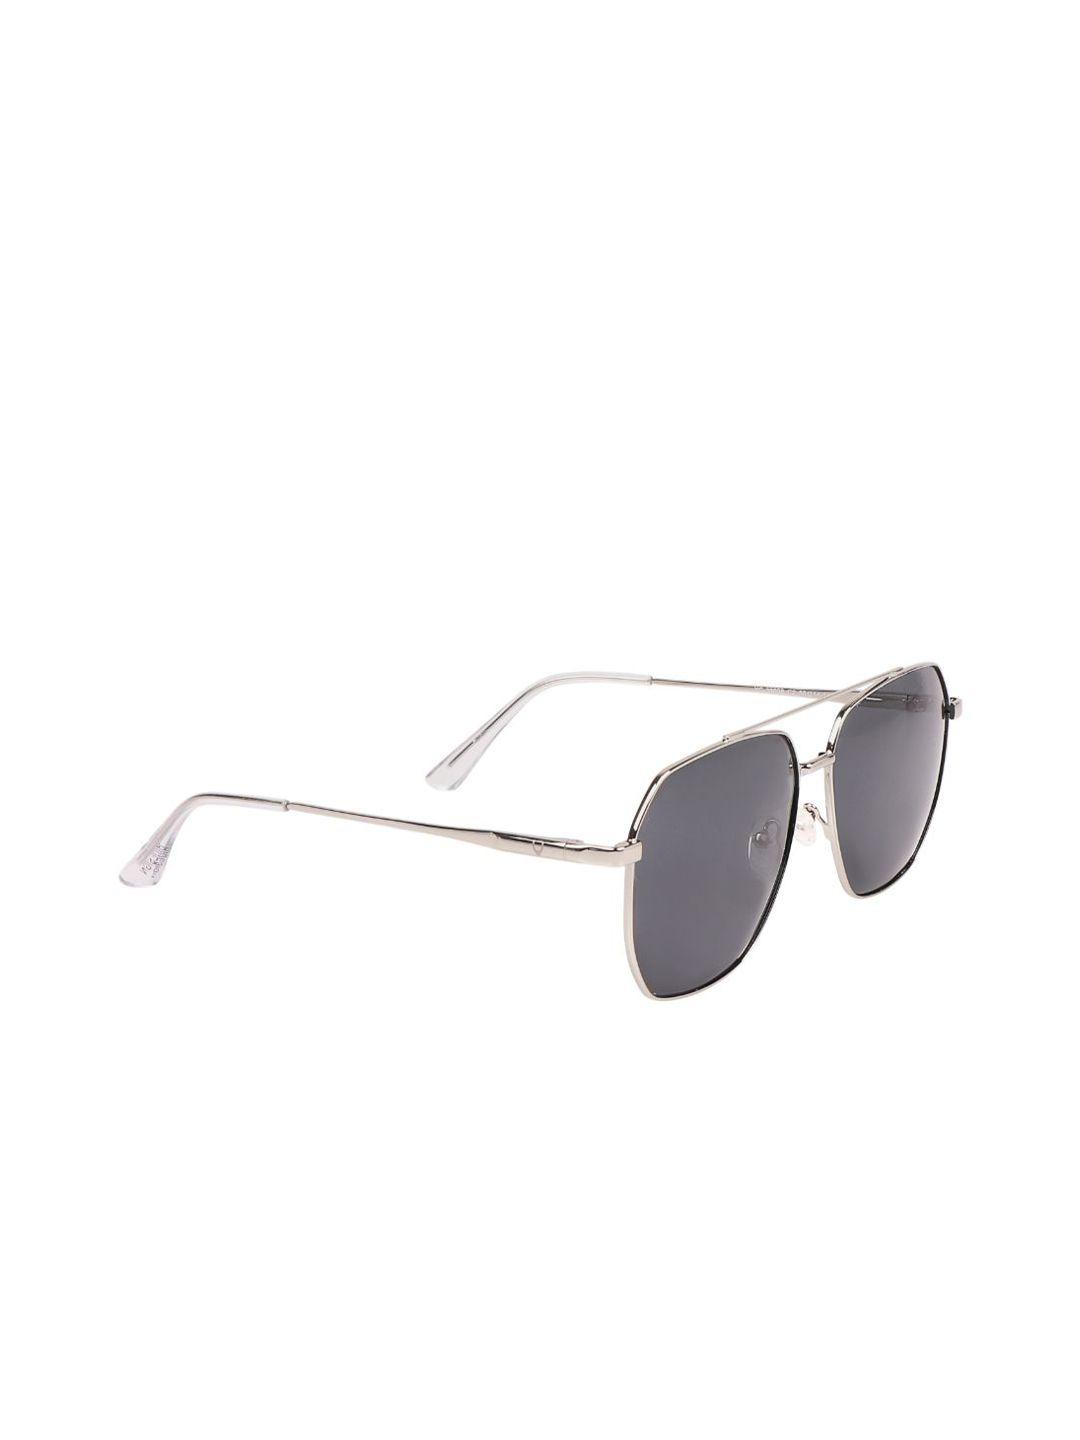 hidesign unisex grey lens & silver-toned sunglasses with uv protected lens - 8903439843595